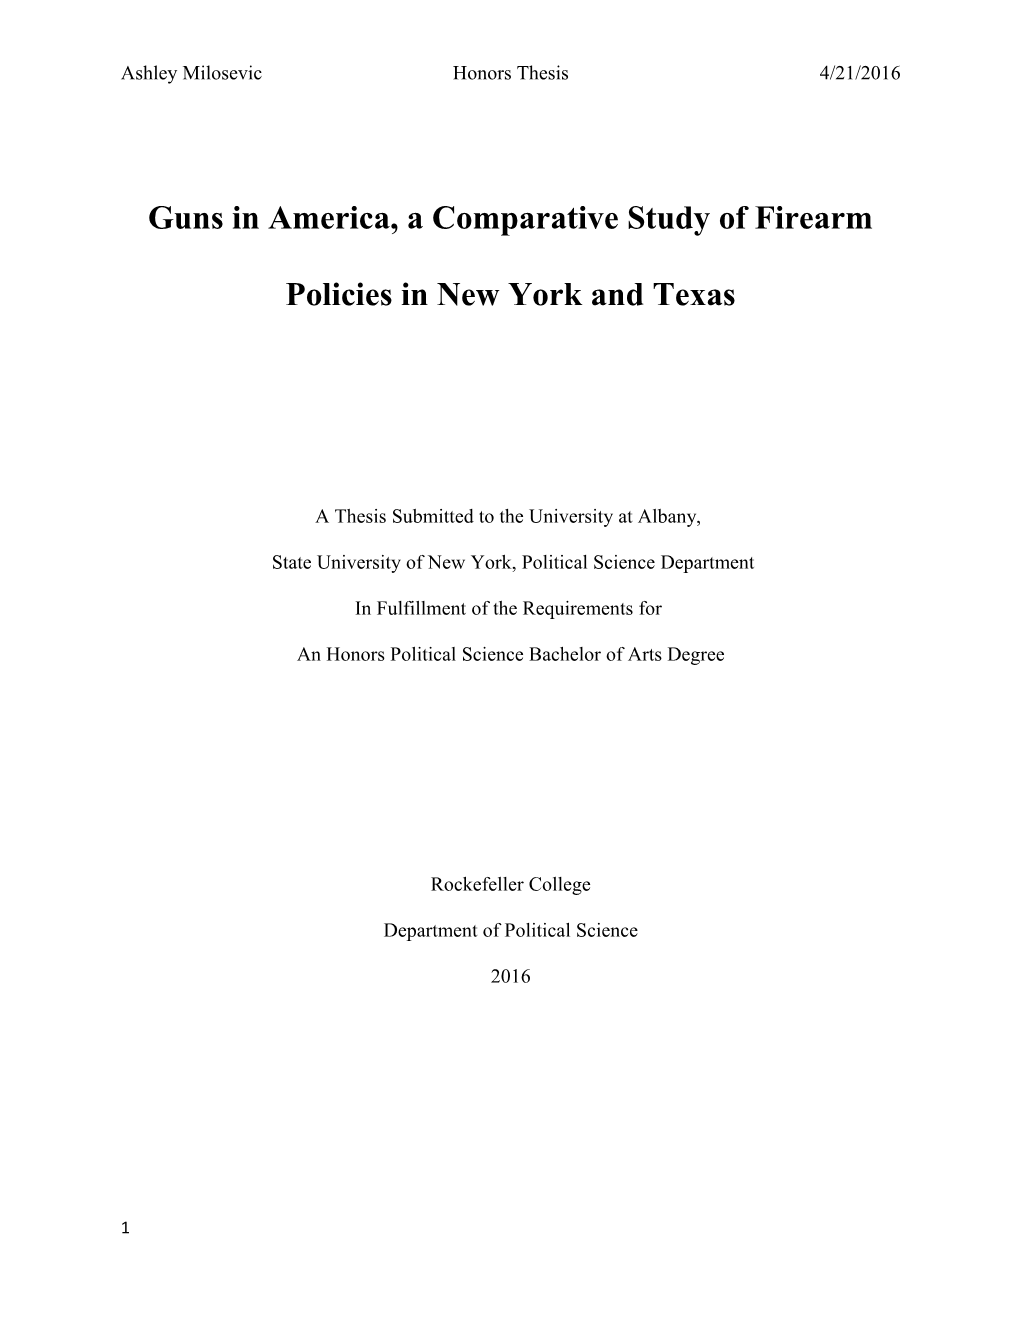 Guns in America, a Comparative Study of Firearm Policies in New York and Texas